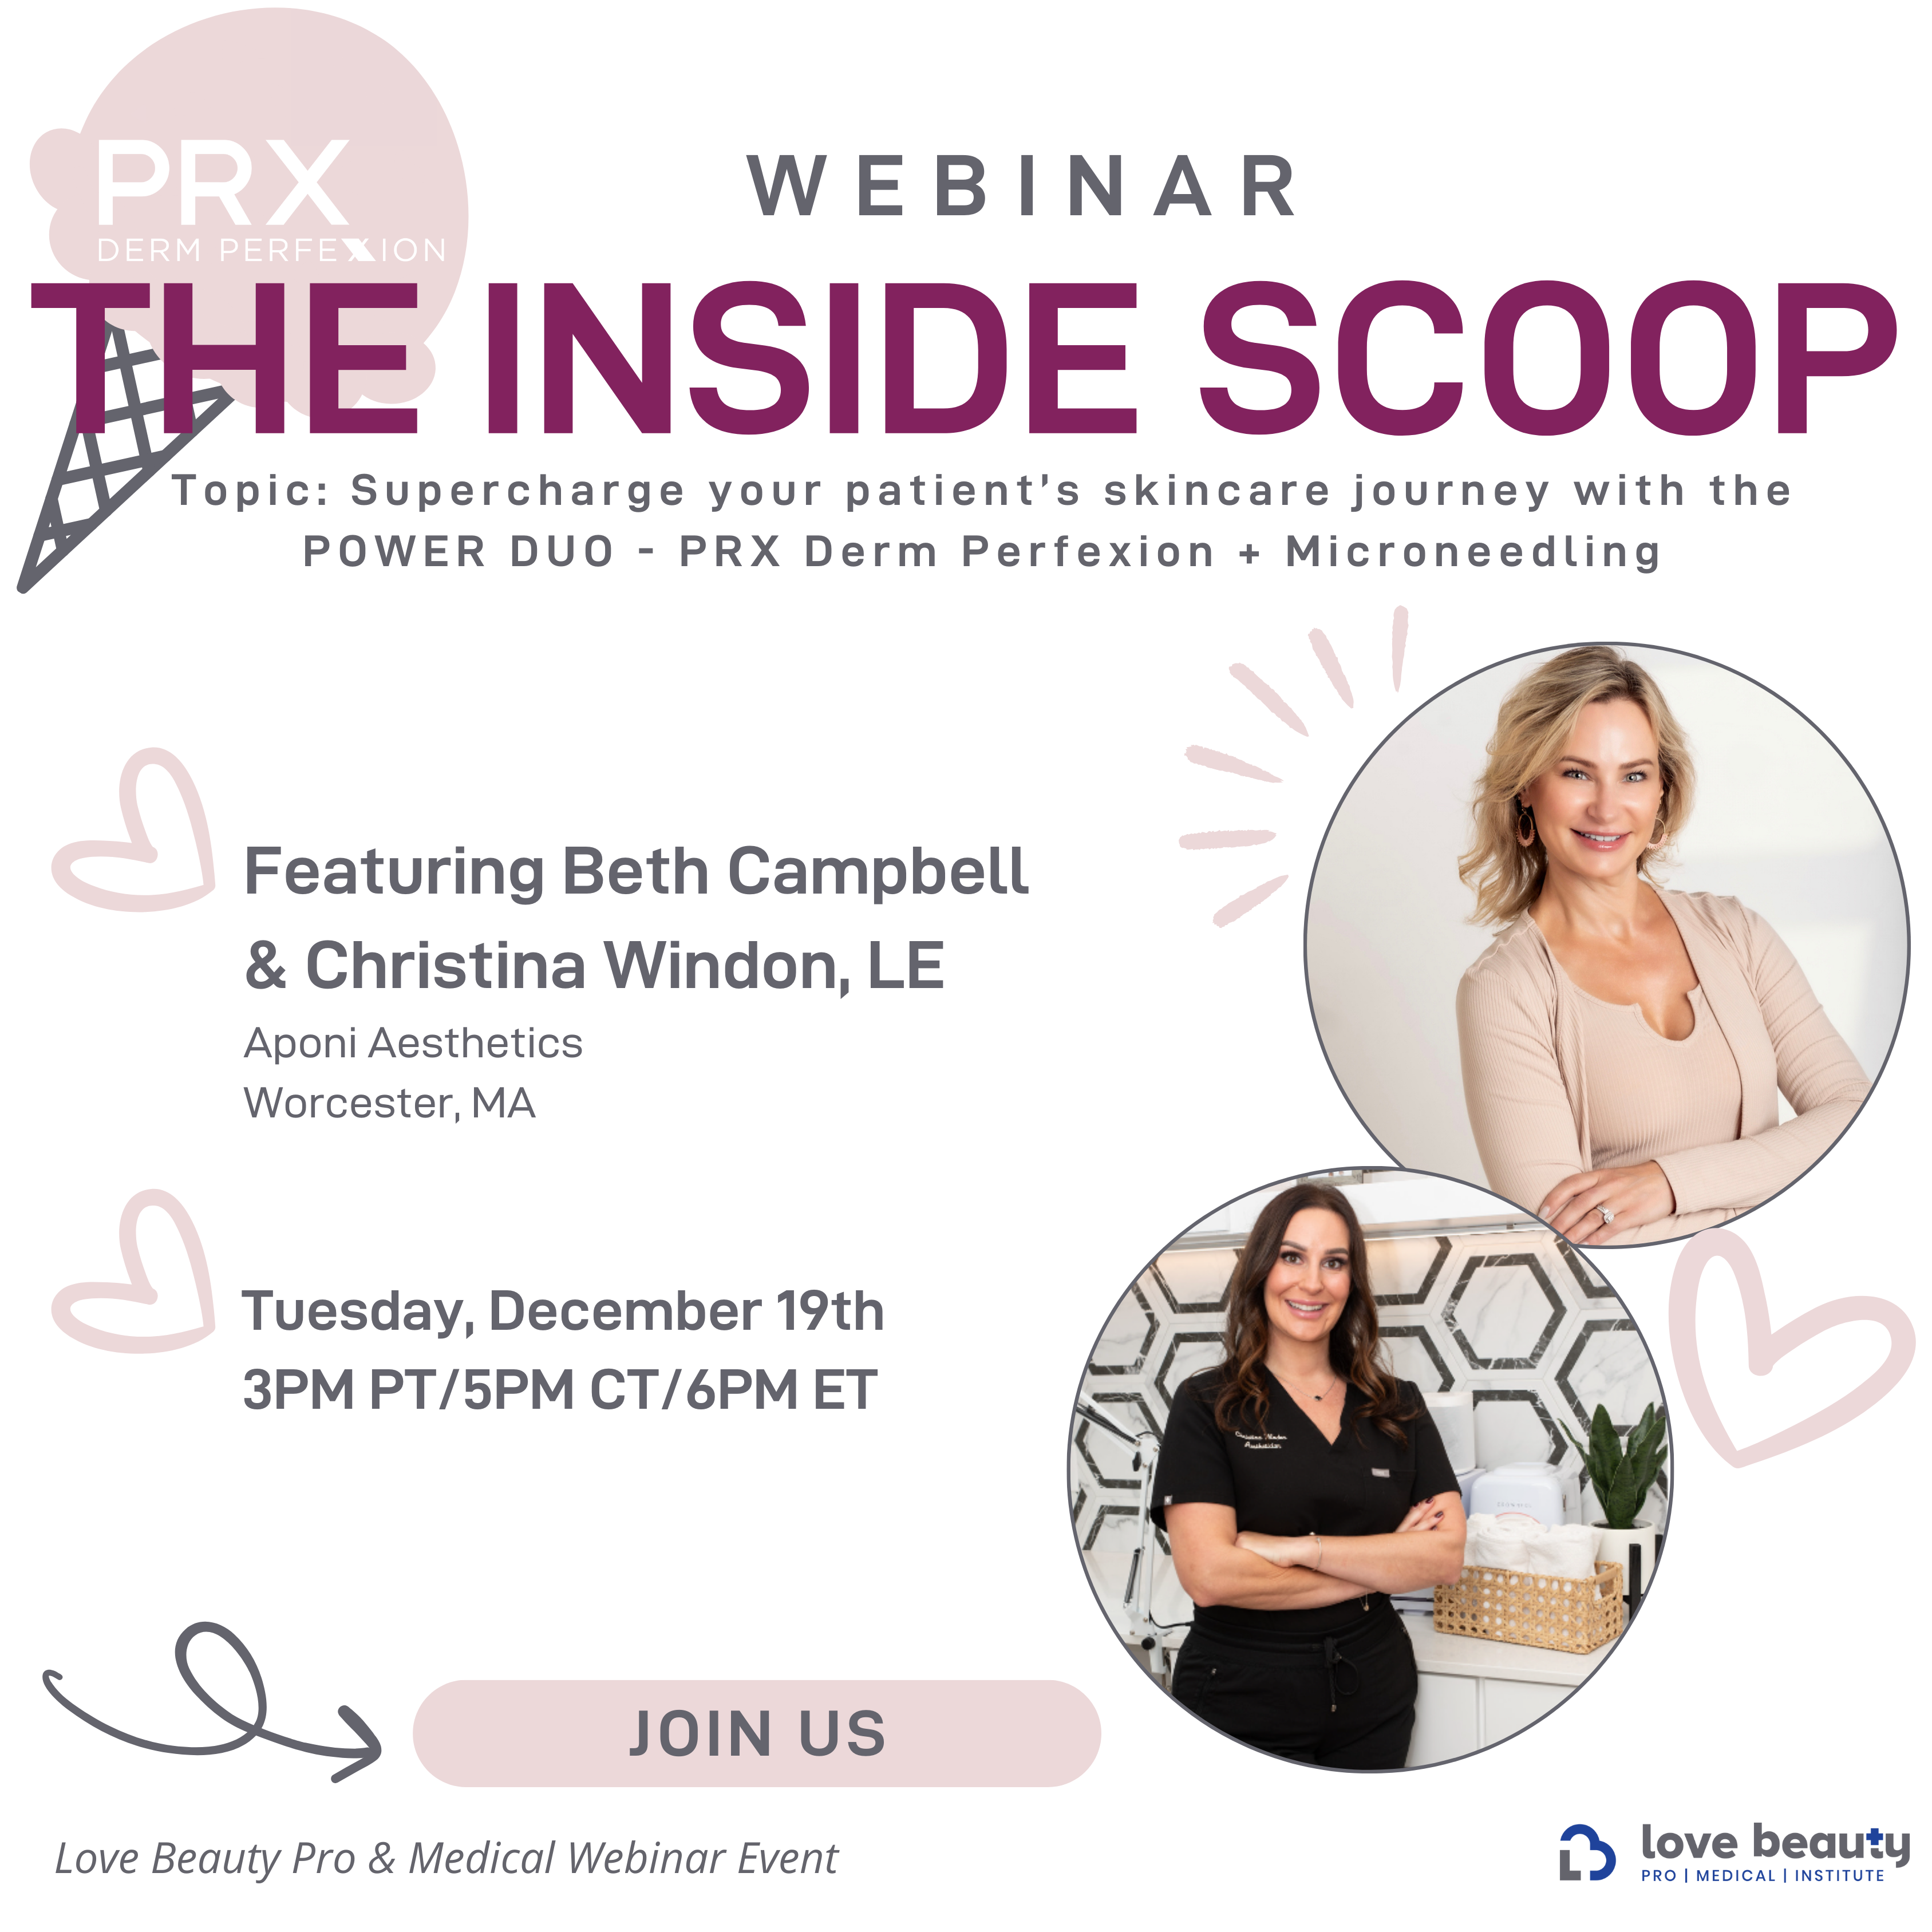 SIMULIVE WEBINAR – The Inside Scoop: Supercharge Your Patient’s Skincare Journey With The POWER DUO-PRX Derm Perfexion  + Microneedling